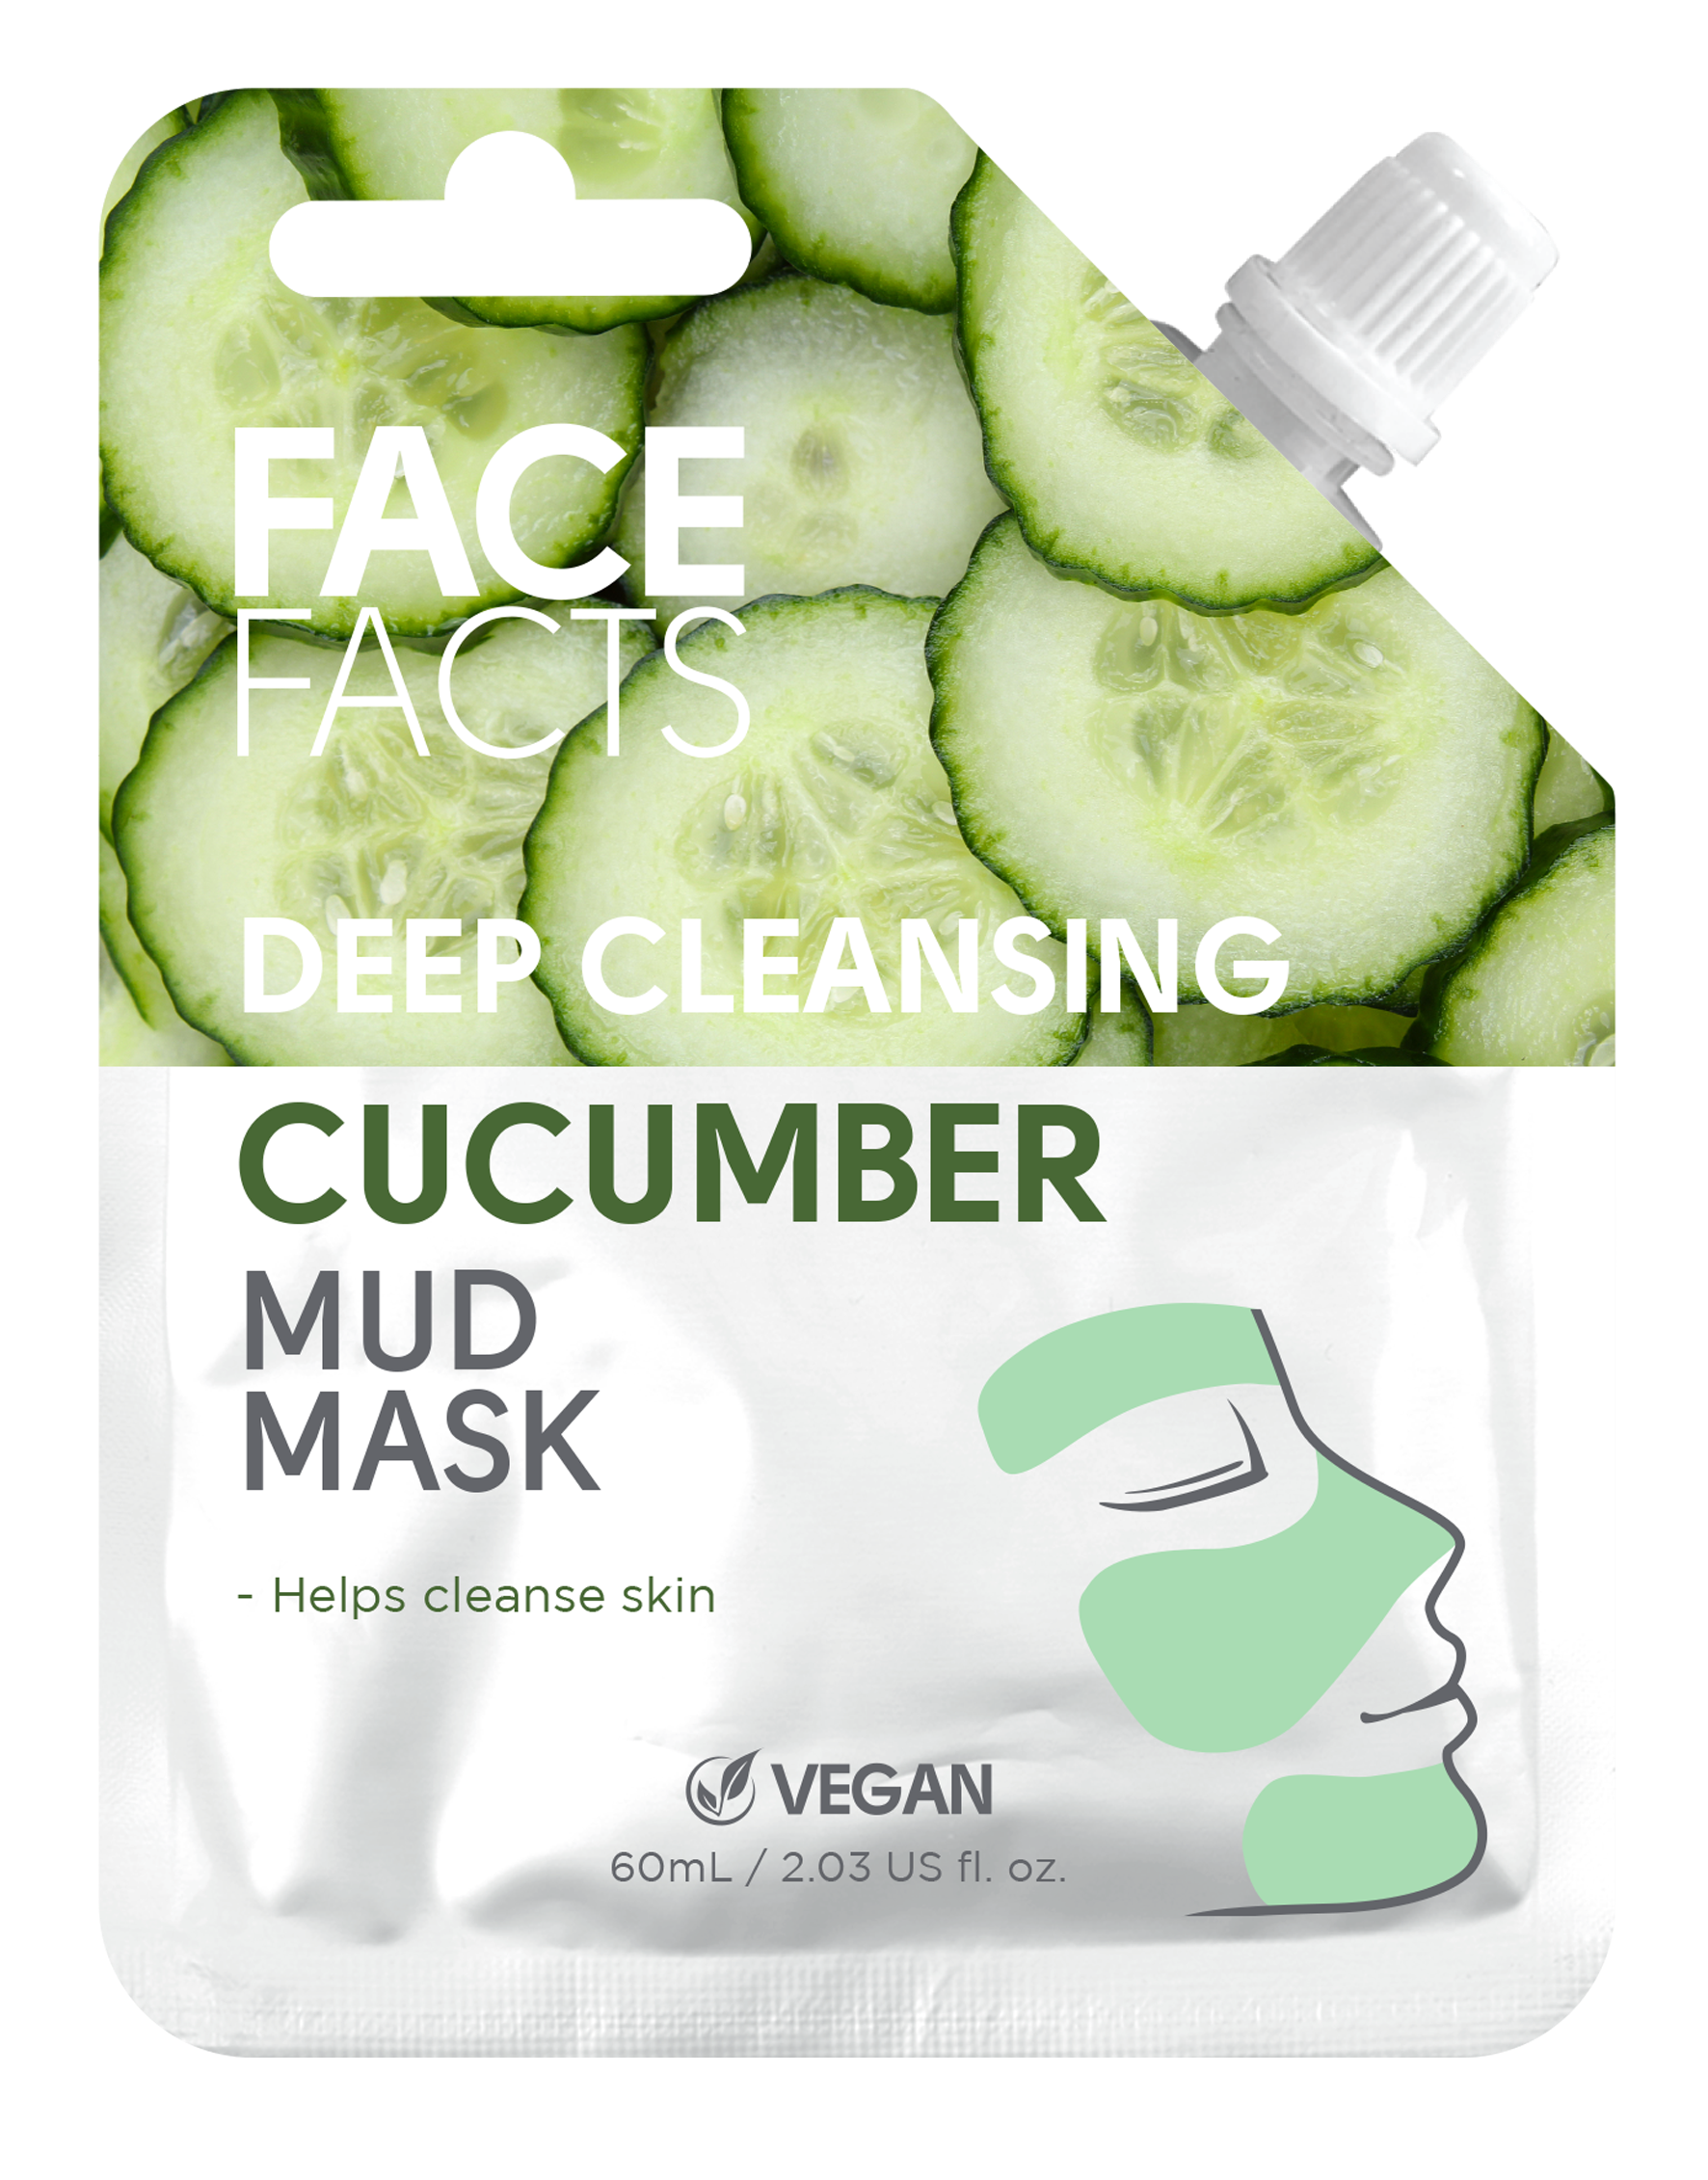 Face facts. Face facts косметика. Очищающая маска fact. Face facts cucumber Mud. Face the fact.